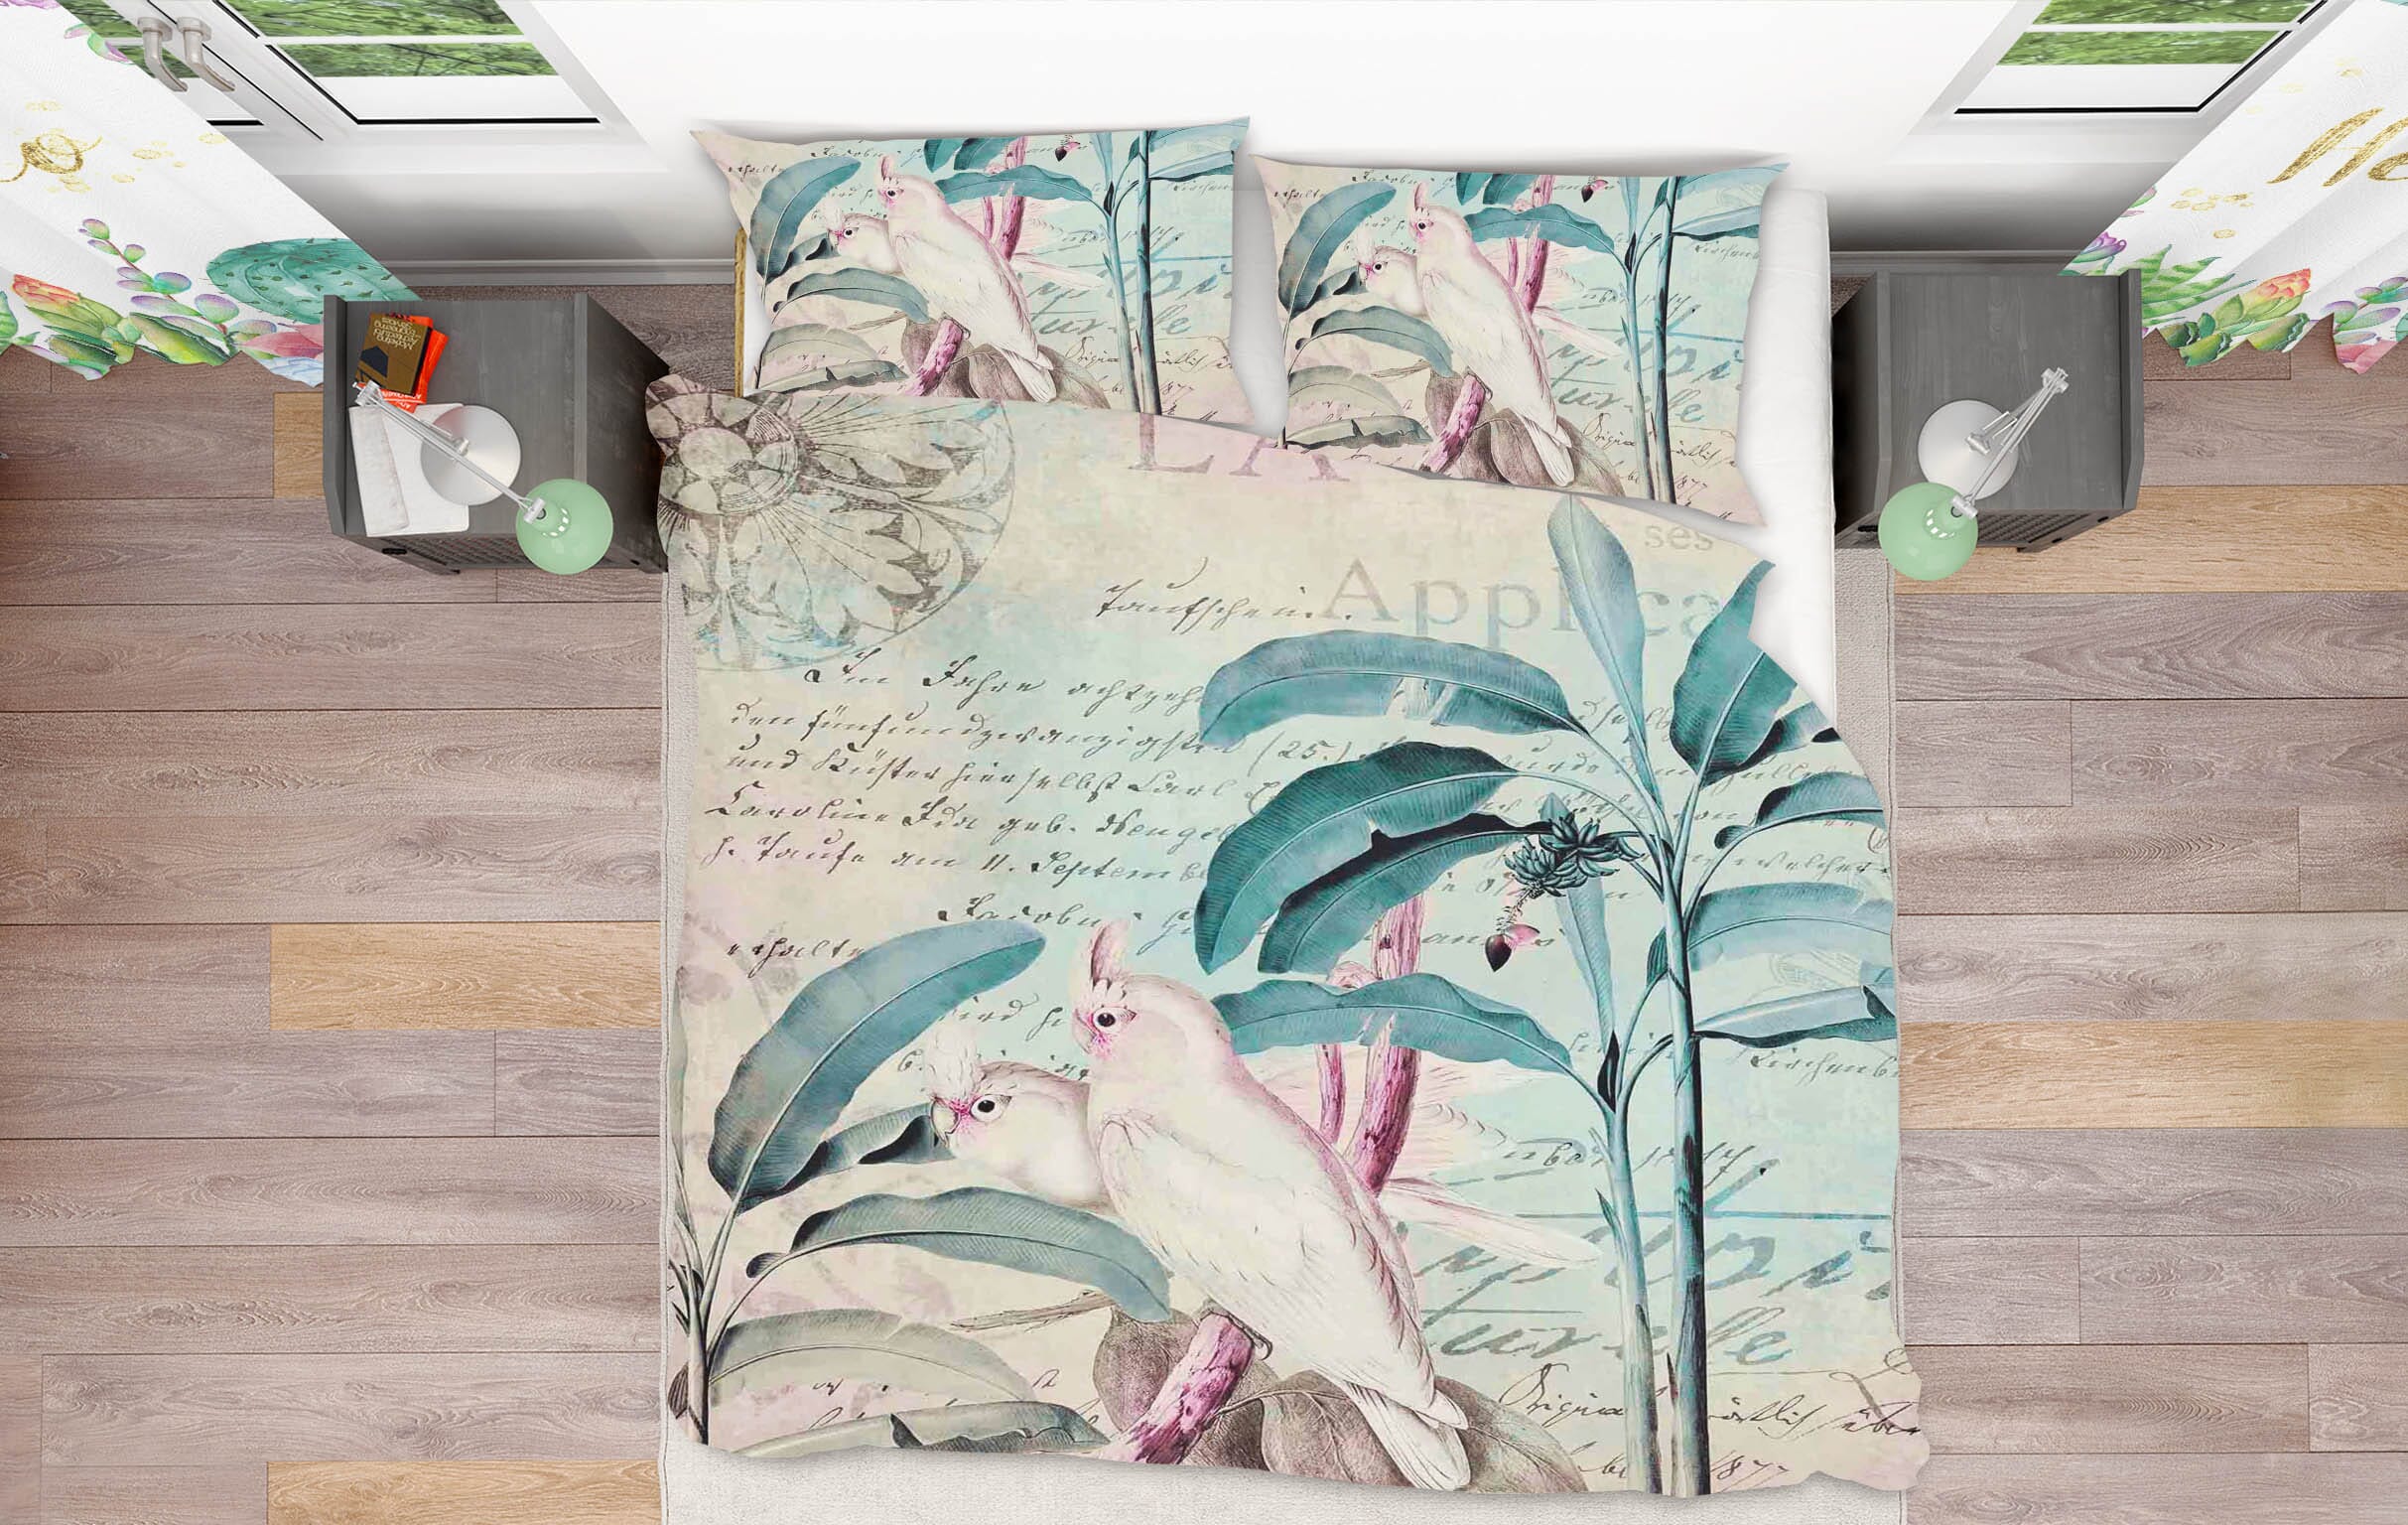 3D White Parrot 2132 Andrea haase Bedding Bed Pillowcases Quilt Quiet Covers AJ Creativity Home 